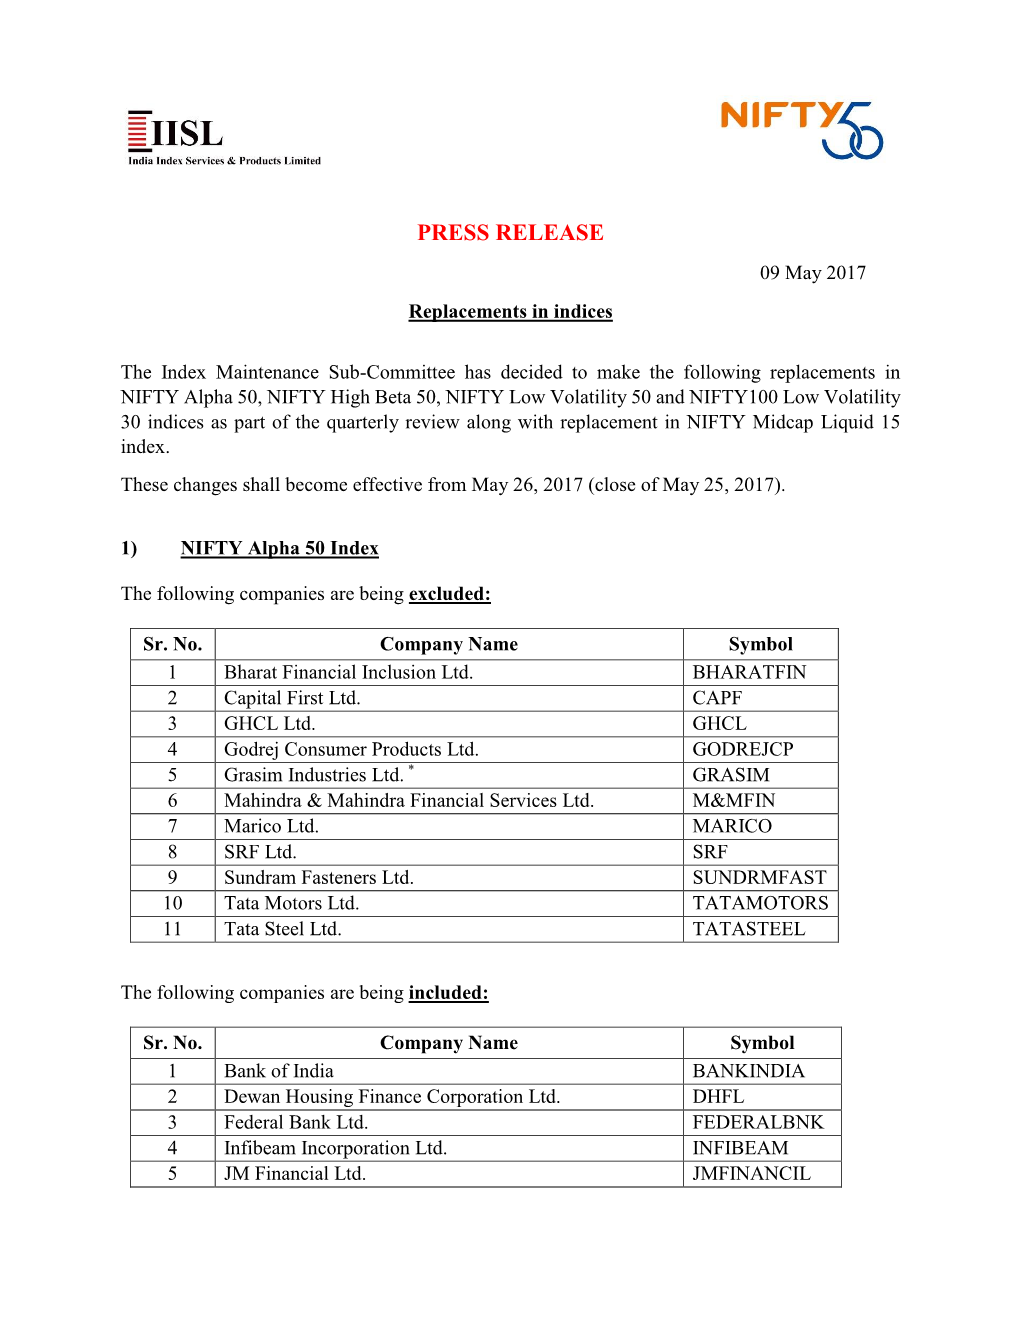 PRESS RELEASE 09 May 2017 Replacements in Indices